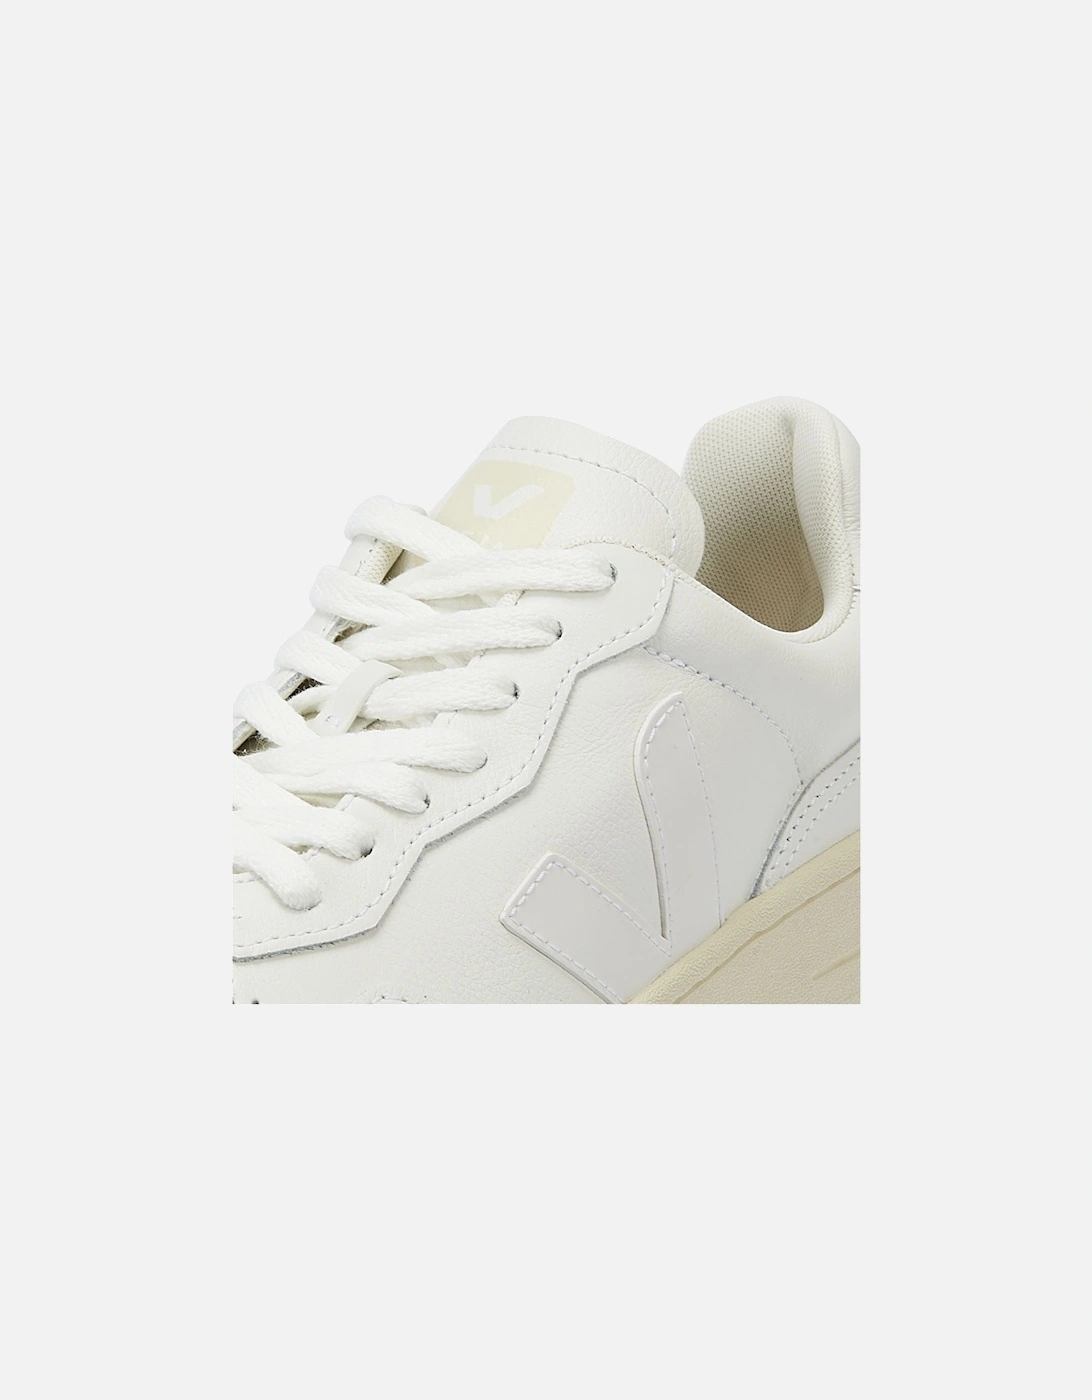 V-90 Women's Extra White Trainers